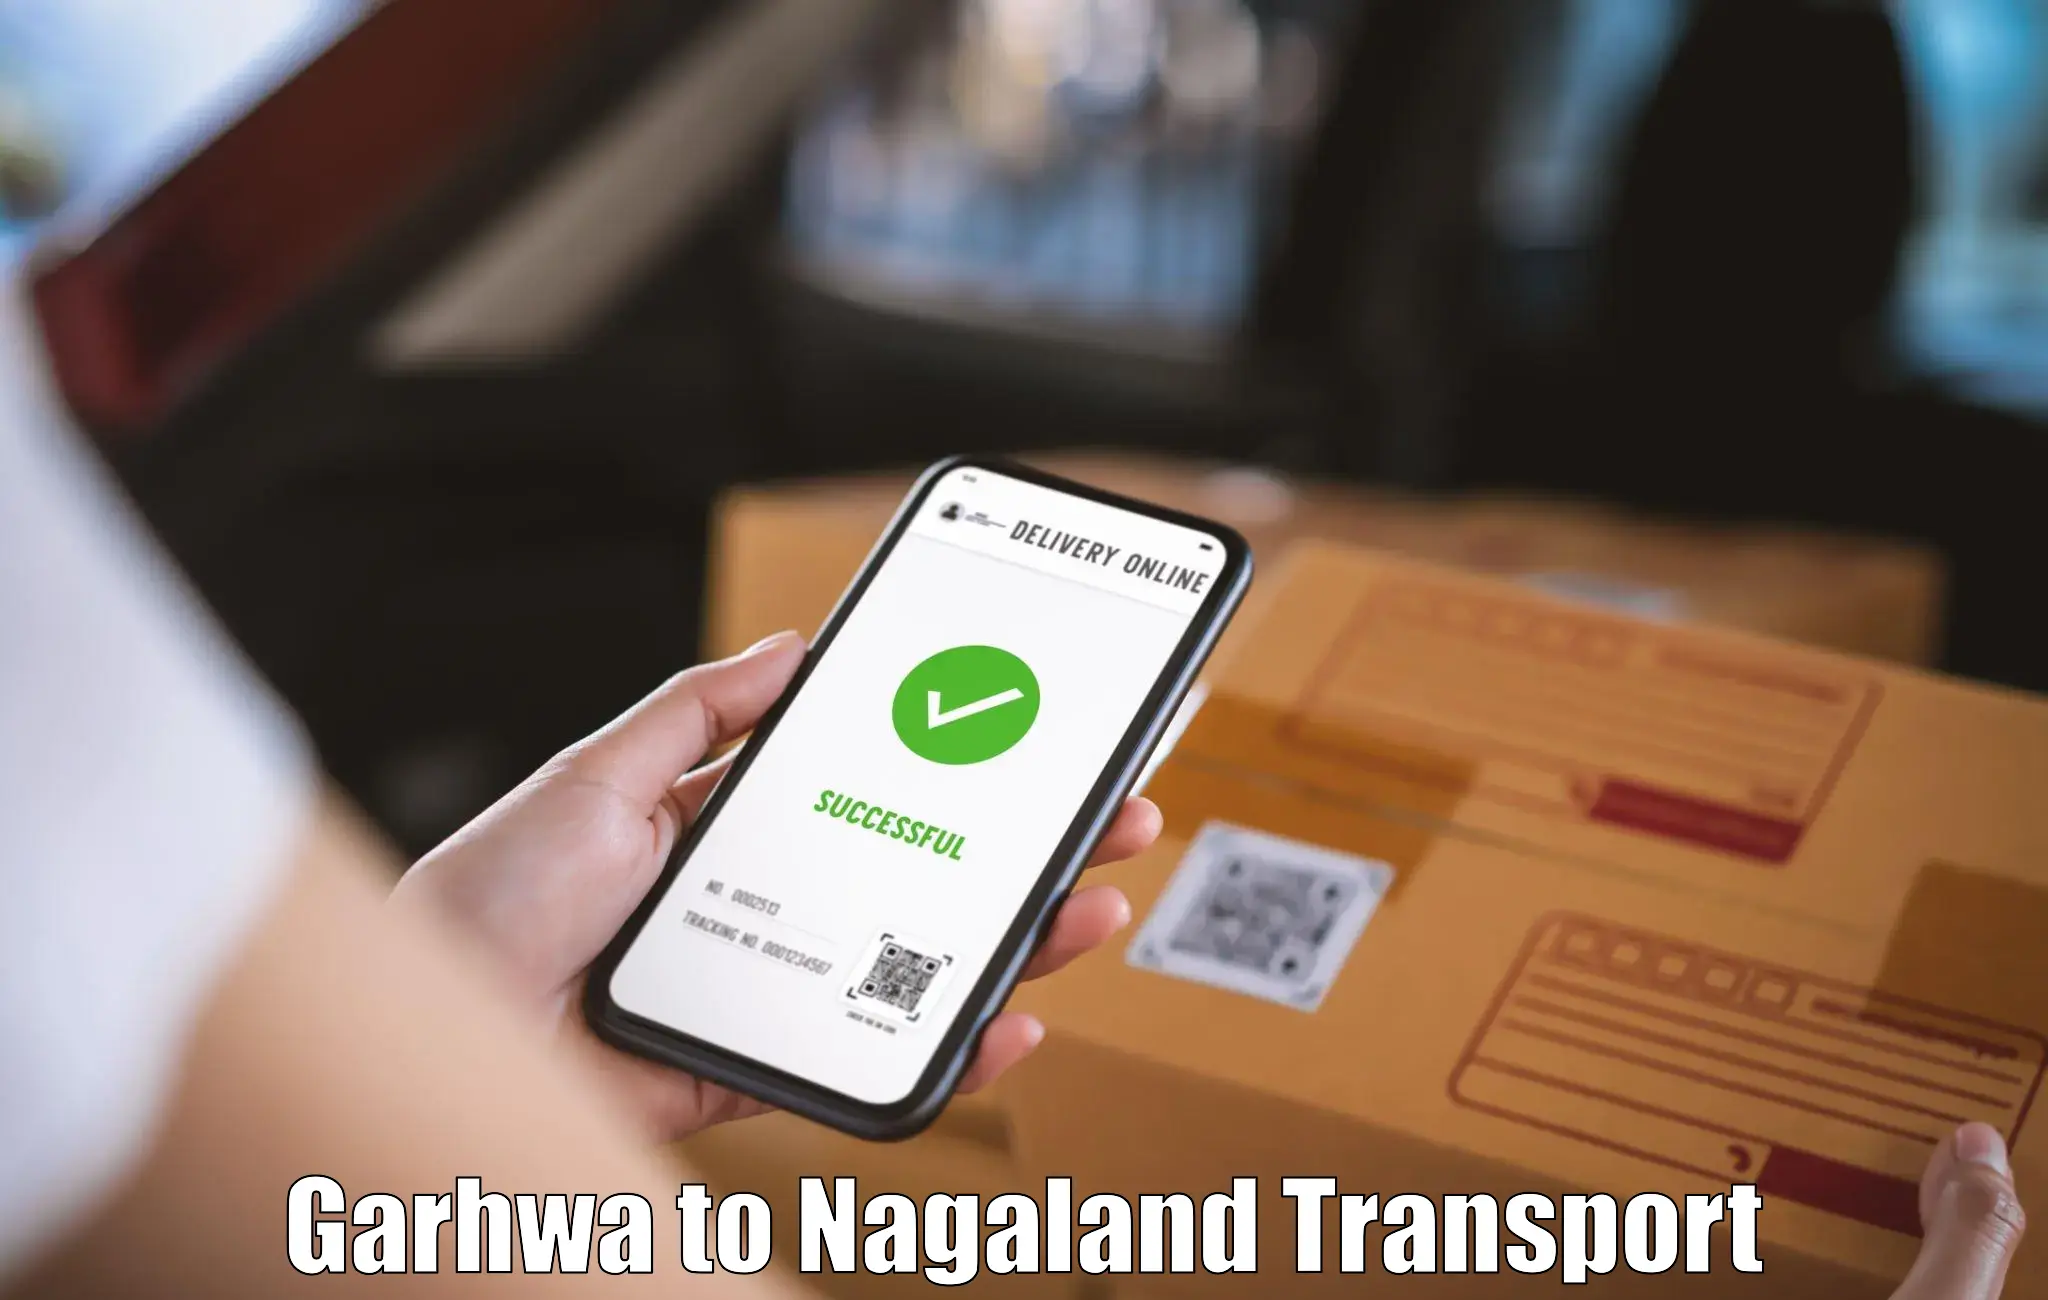 Express transport services in Garhwa to Kohima